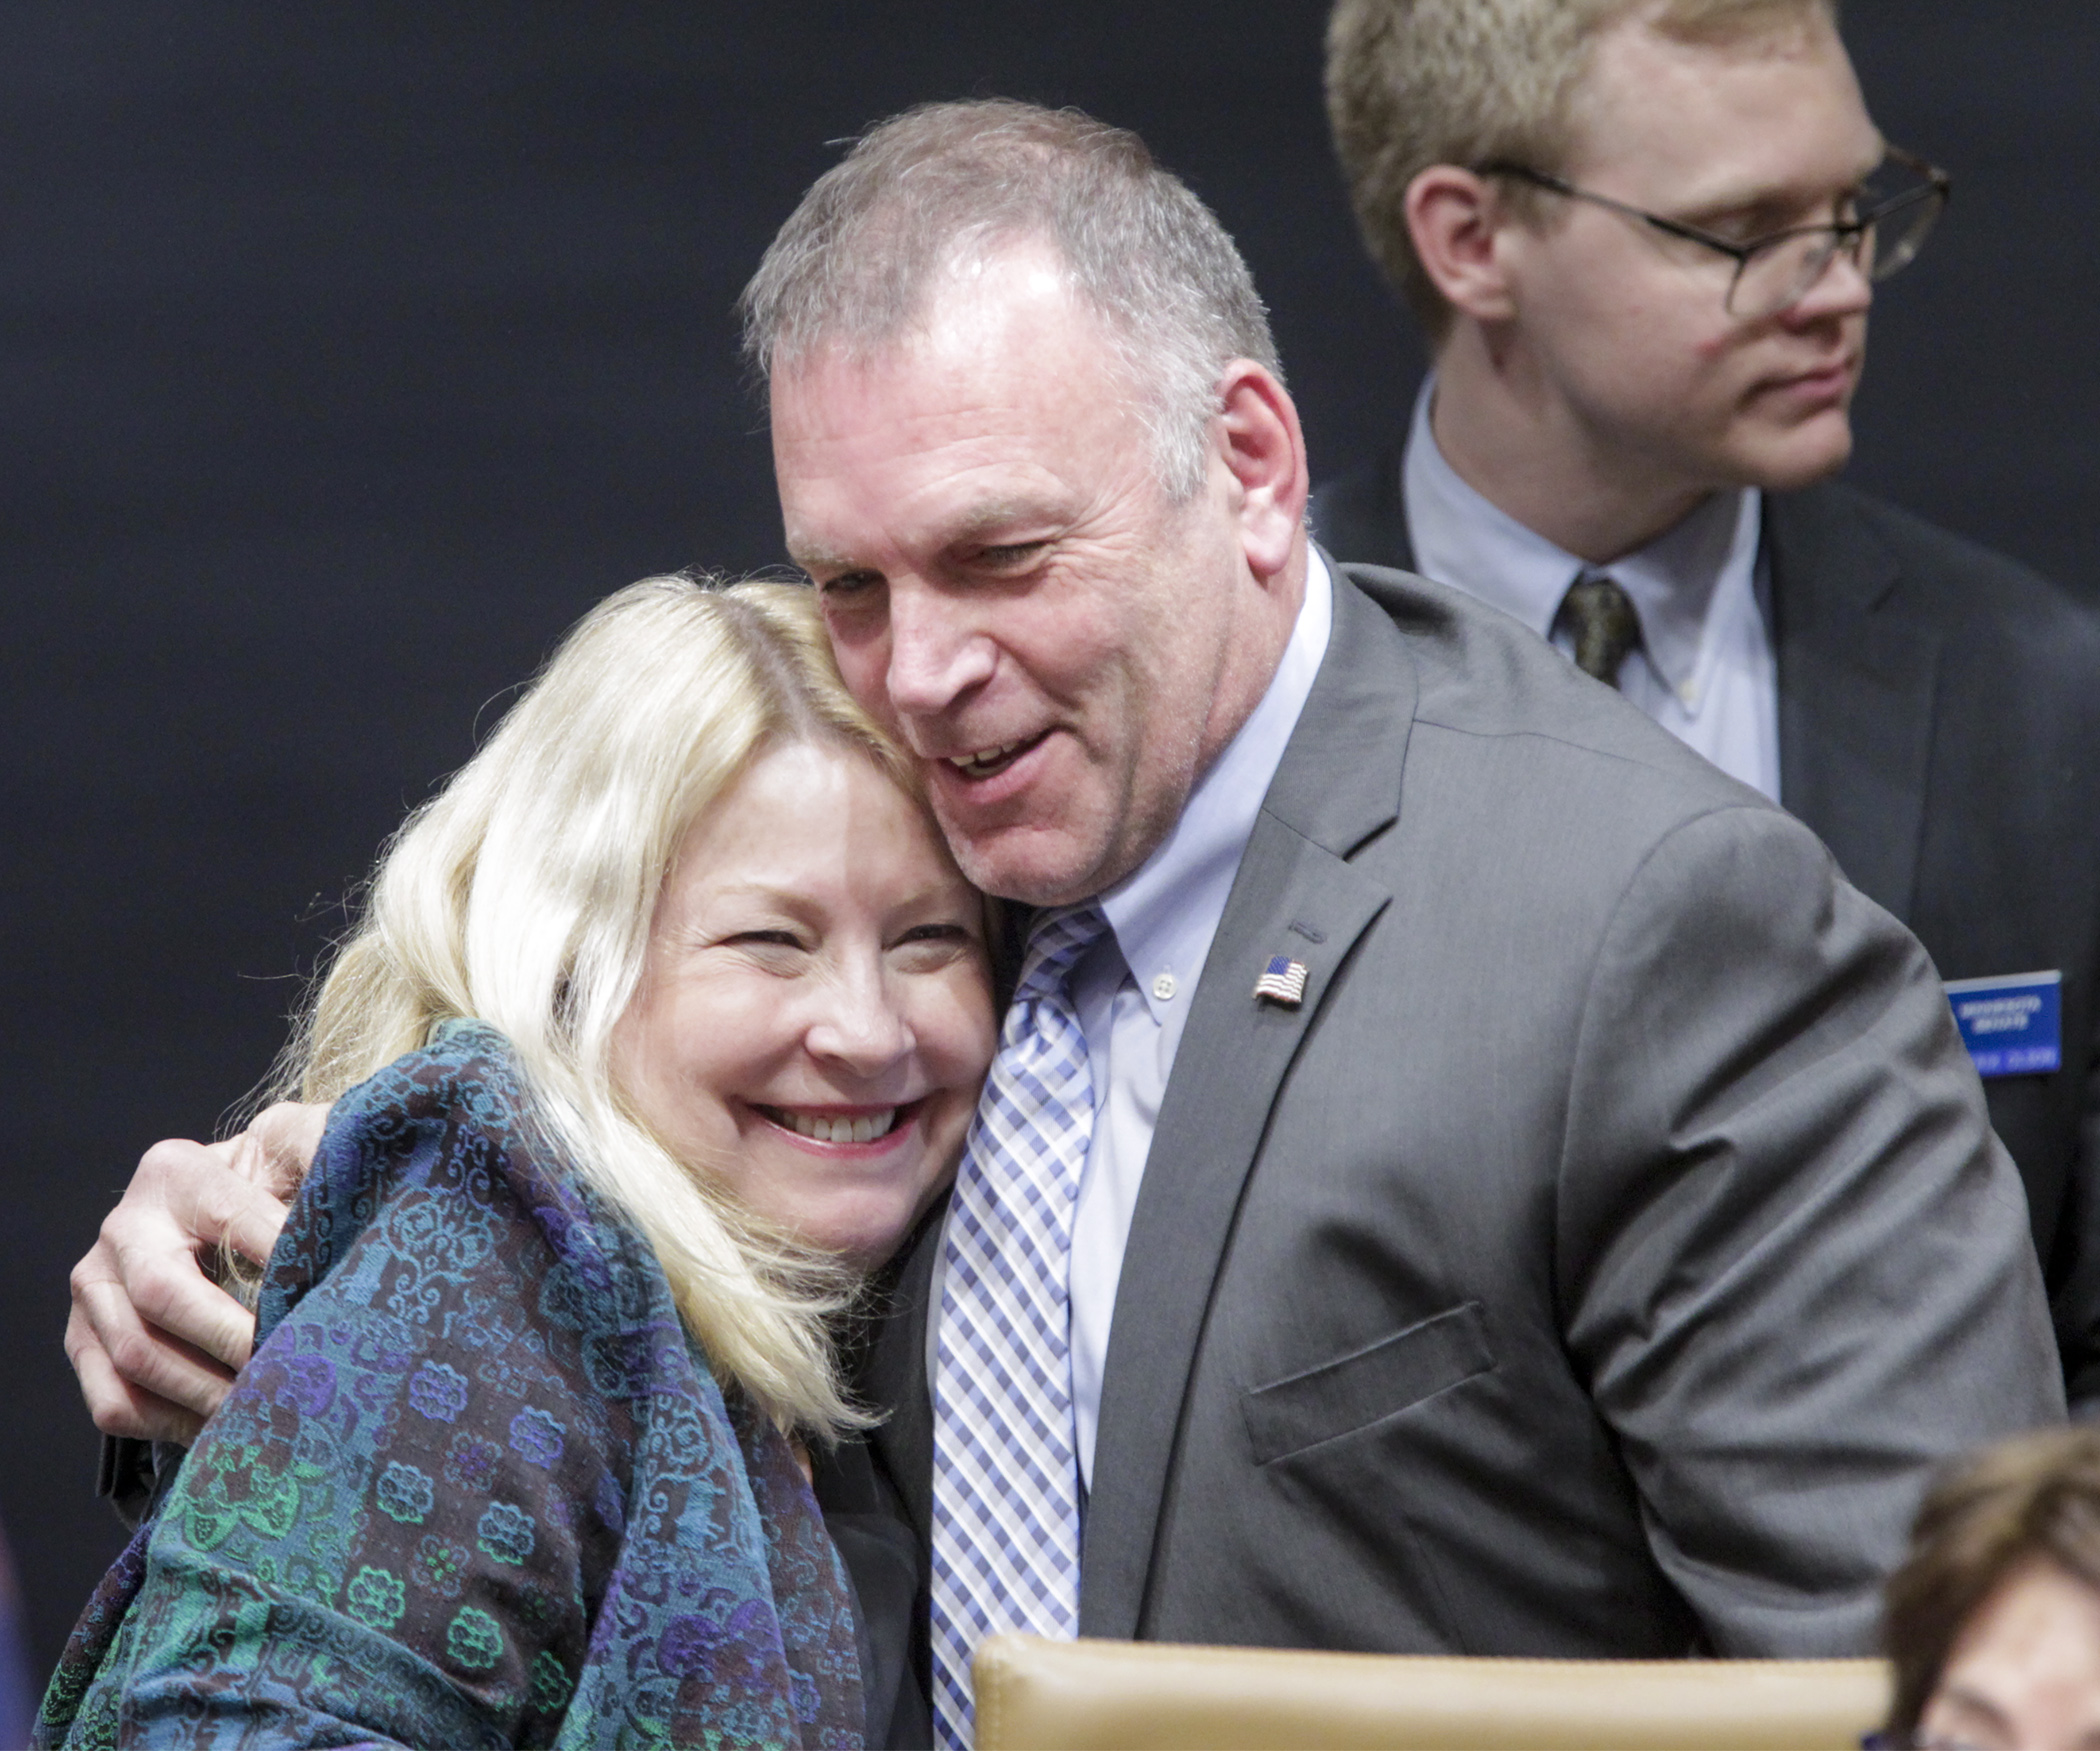 Rep. Dave Baker and Sen. Chris Eaton, who both lost children to opioid addiction, share a hug after the opioids conference committee wrapped up its work May 20. Photo by Paul Battaglia.